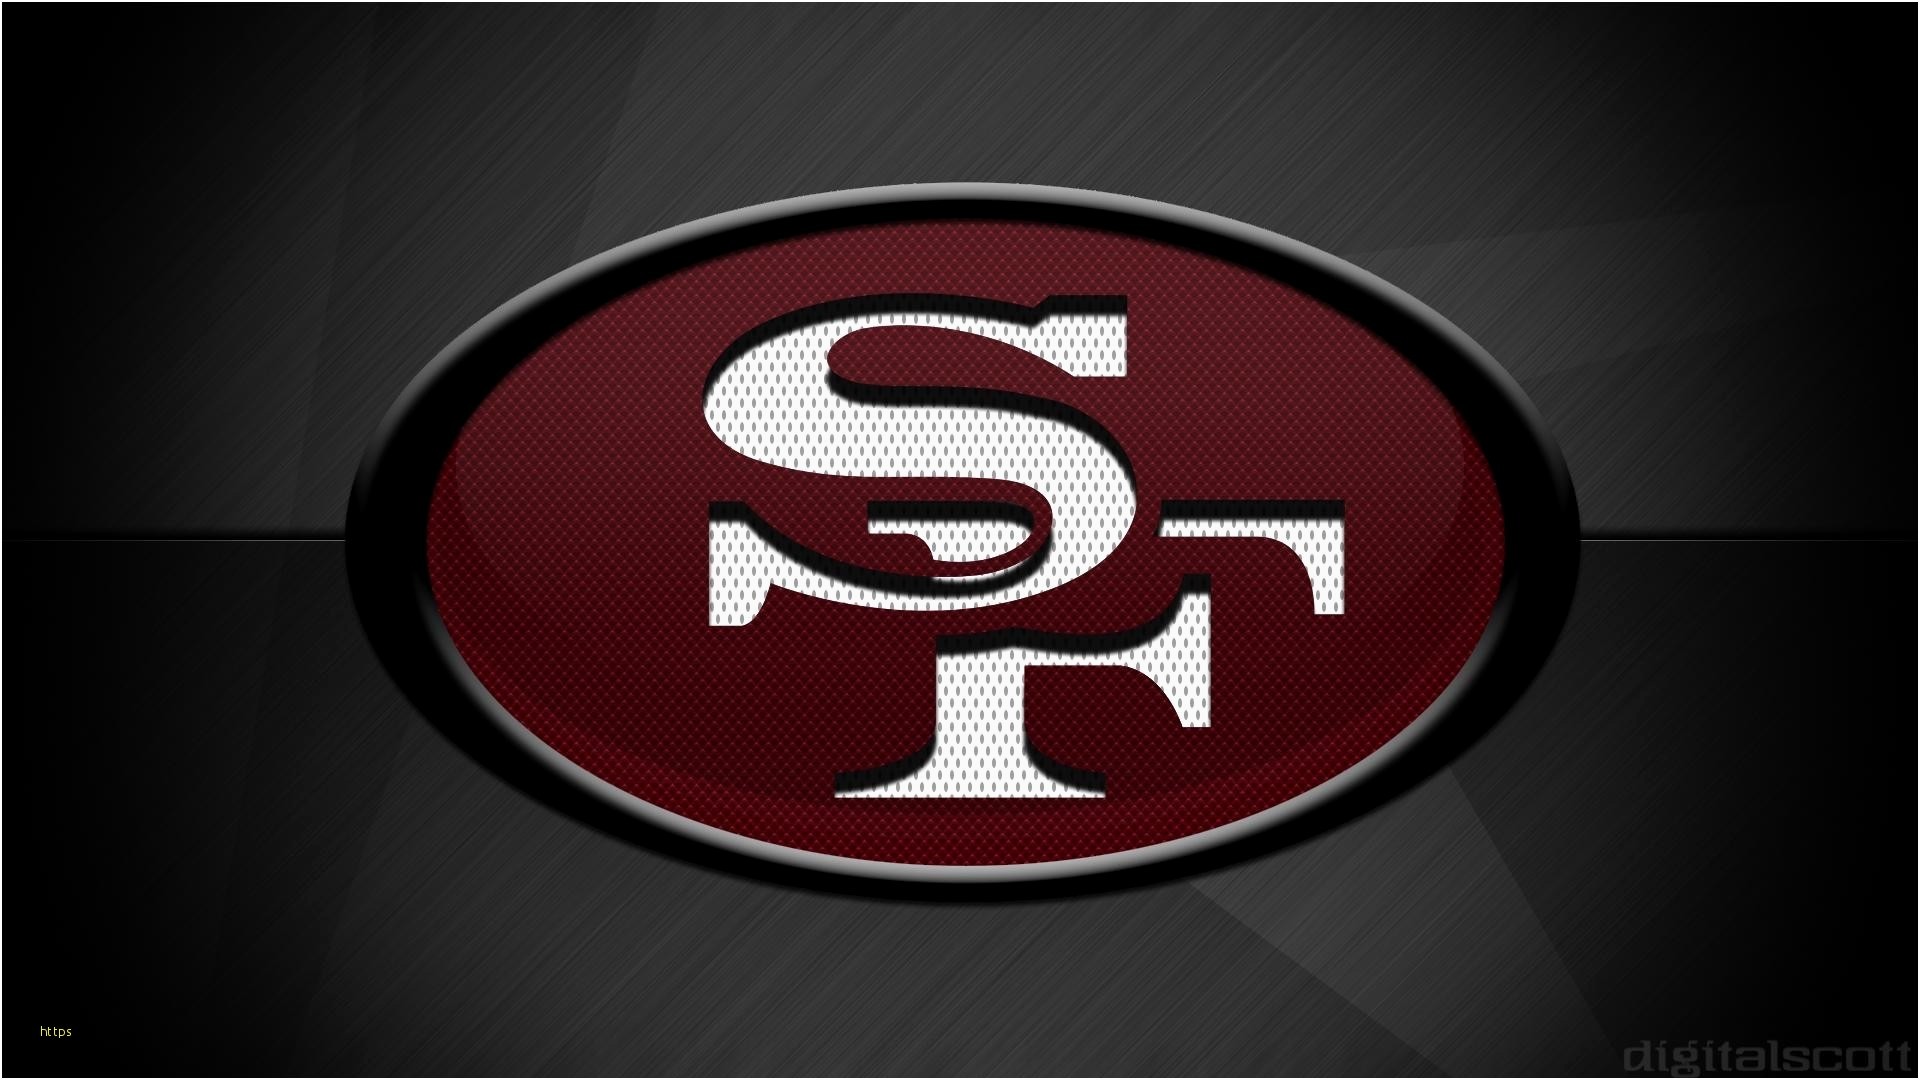 1920x1080 49ers Logo Wallpaper Awesome Ncis Logo Wallpaper 68 Images